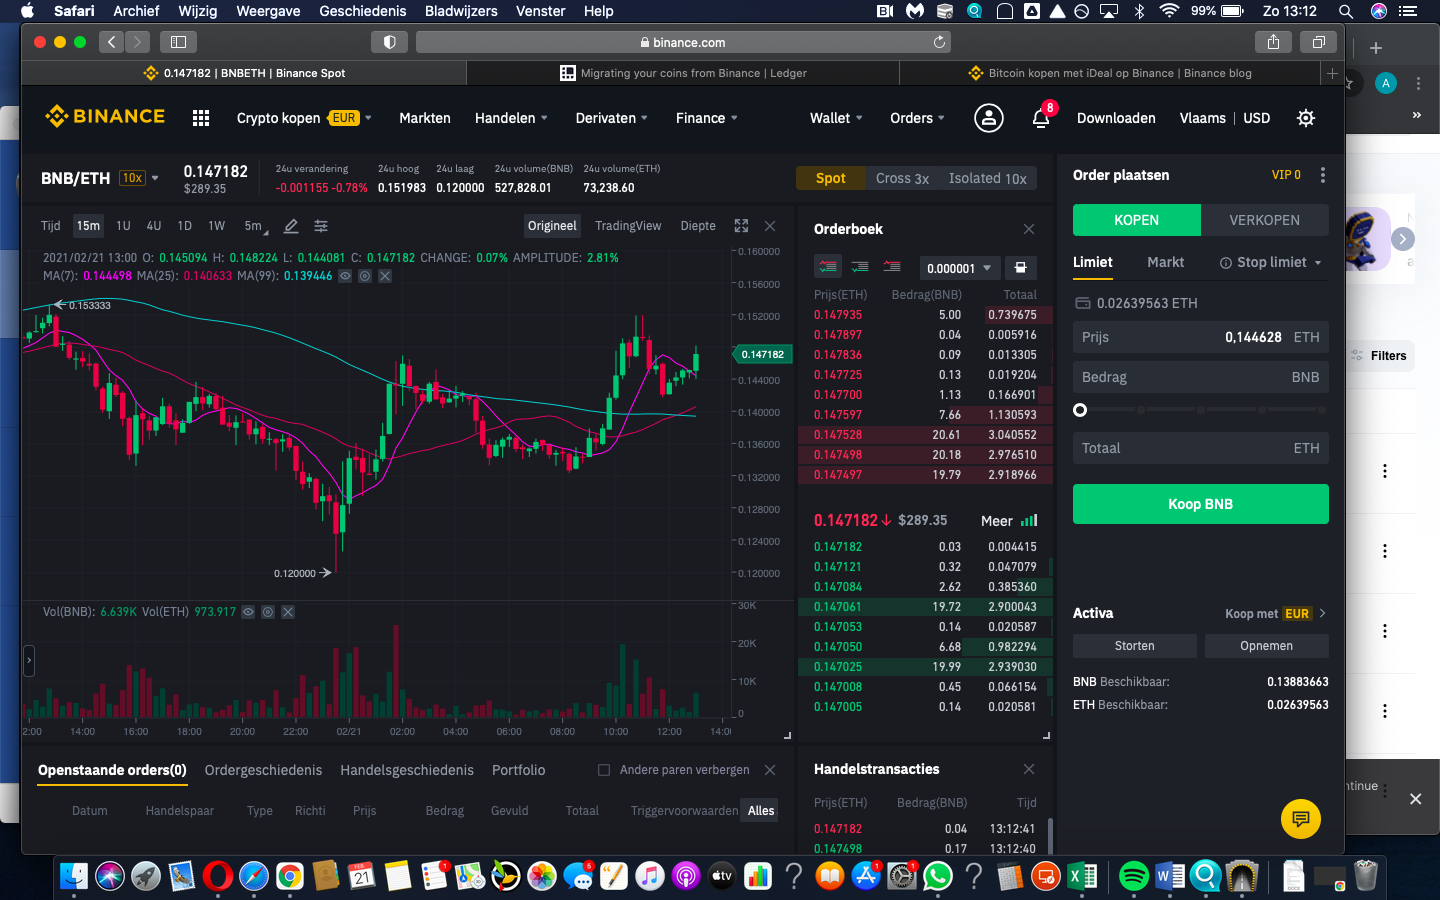 Binance complaint ETH currency higher when made a deposit via ideal